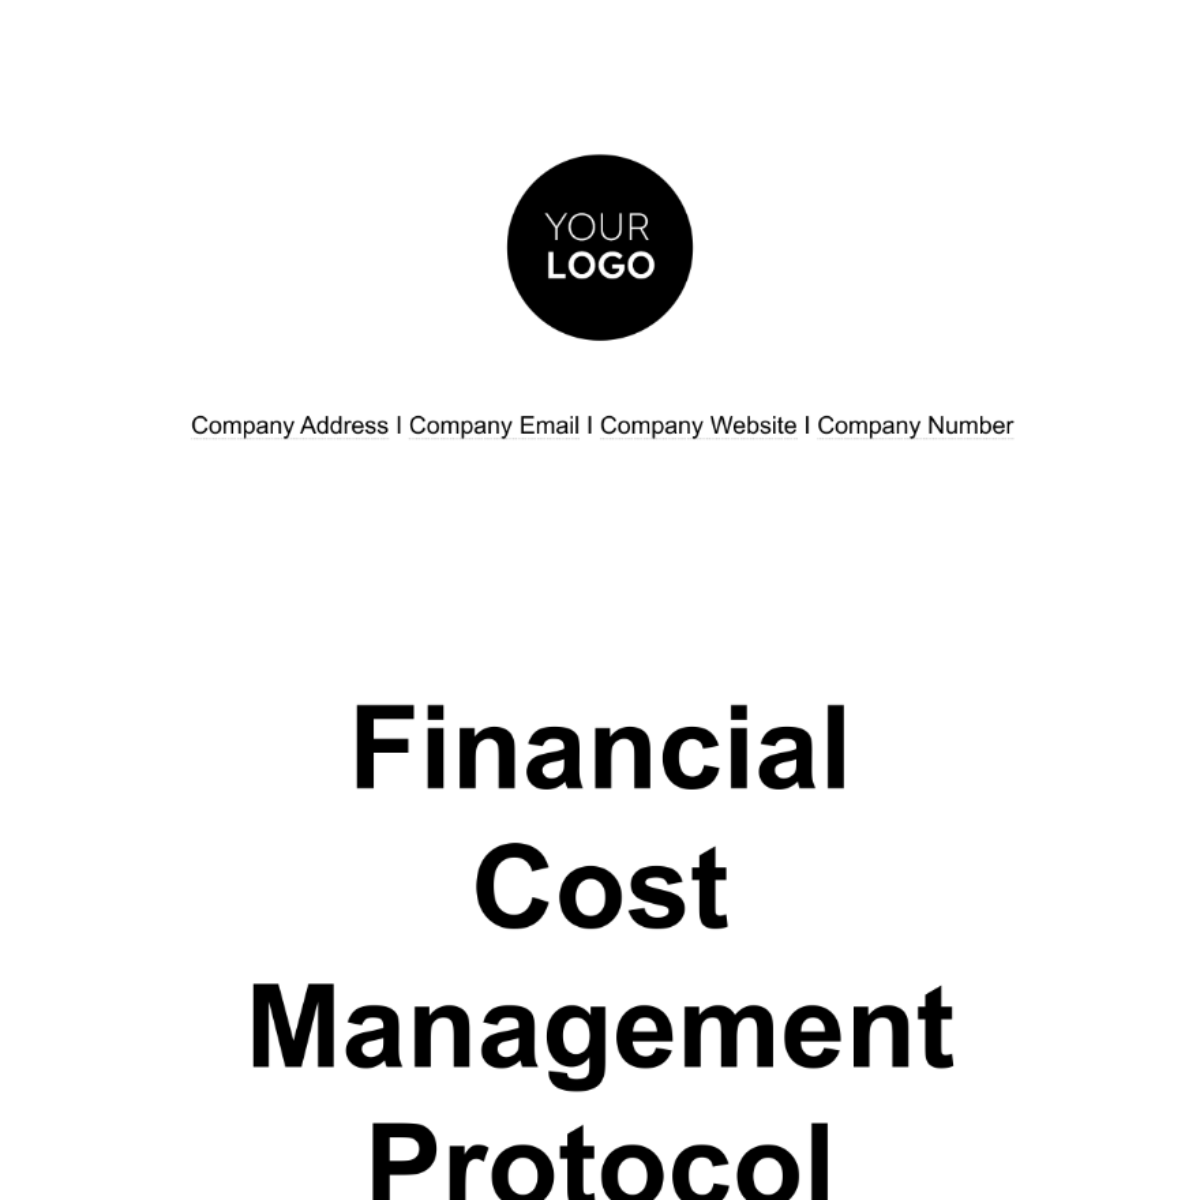 Financial Cost Management Protocol Template